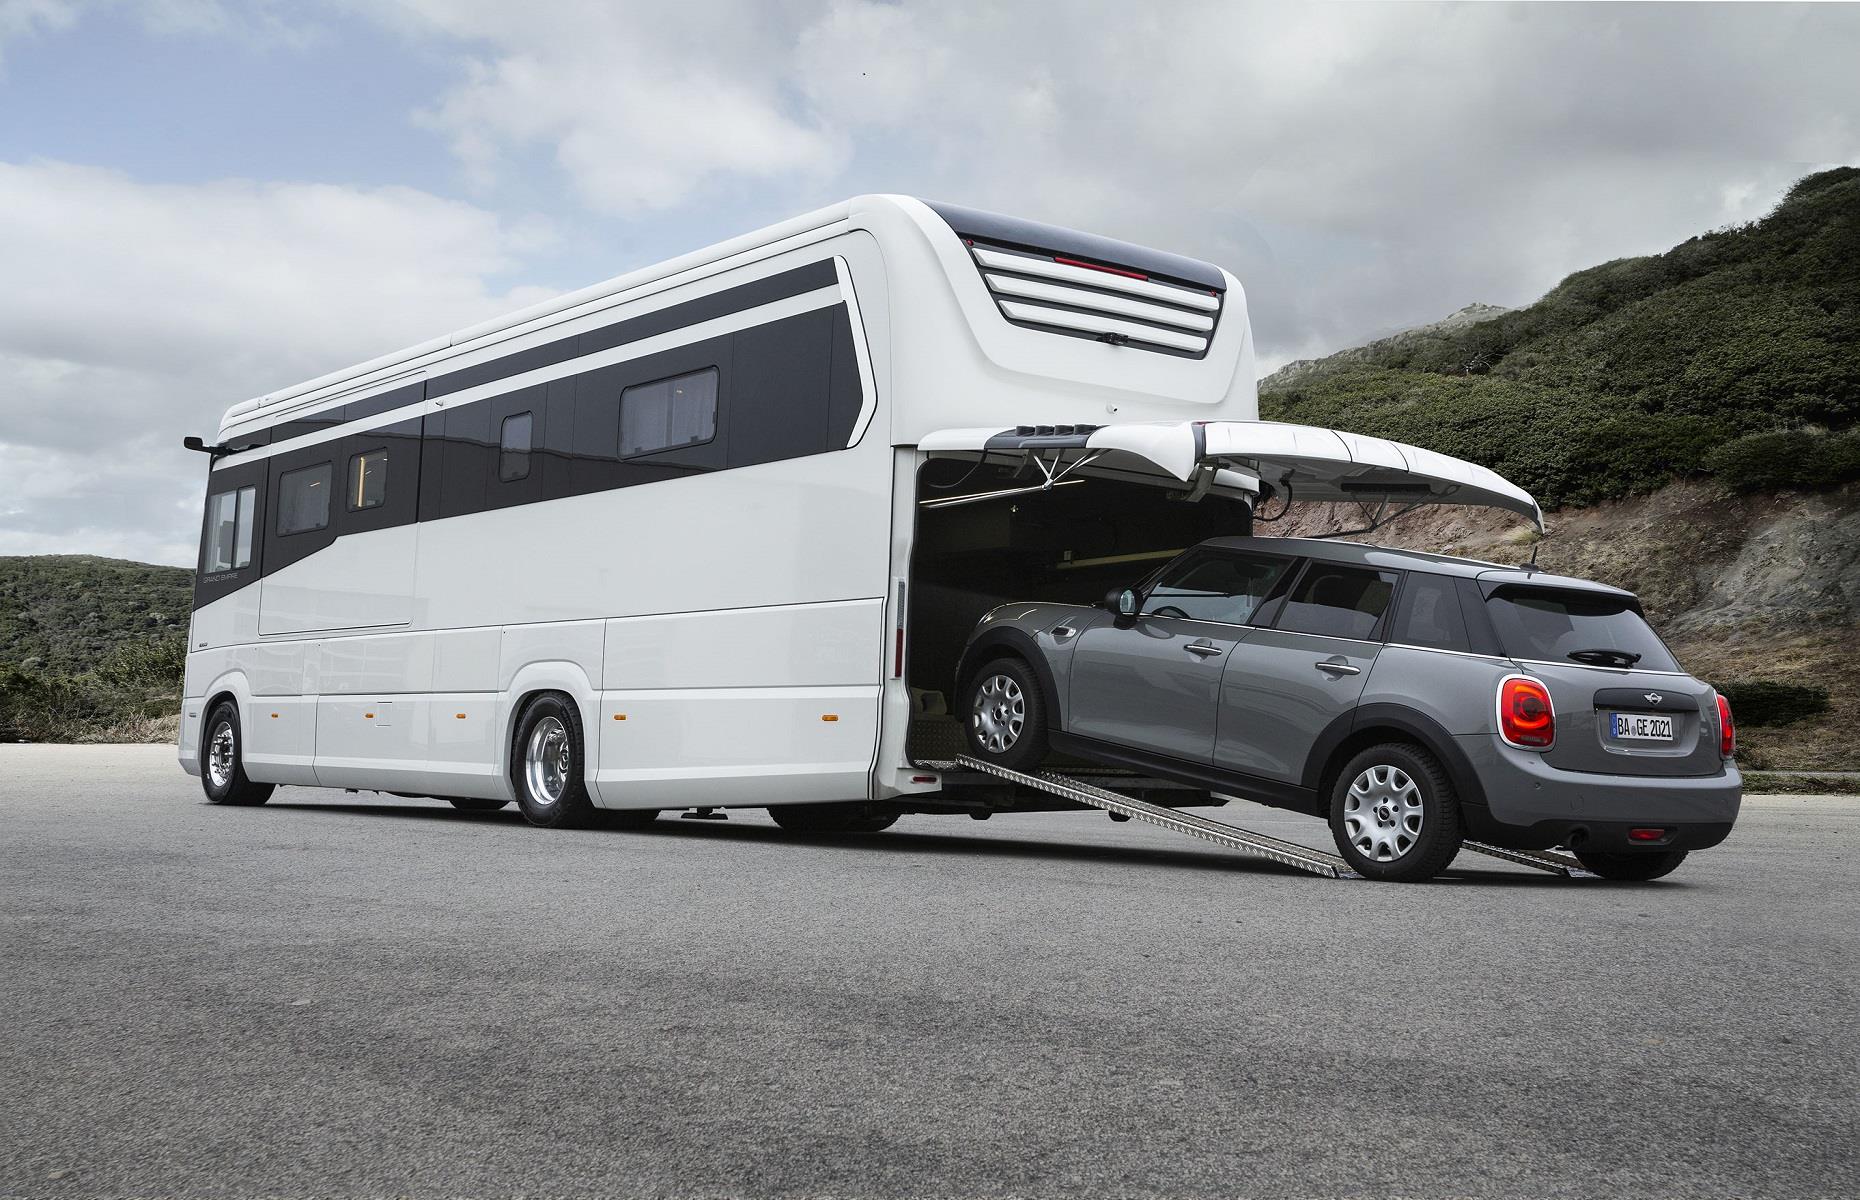 <p>Over the past decade, MORELO has been committed to producing stunning, luxurious motorhomes. Looking to meet the needs of the modern owner, they began designing a motorhome that prioritized space, comfort, performance, safety and style. The result is the <a href="https://www.morelo-reisemobile.de/en/models/grand-empire">MORELO Grand Empire</a>, which the company states overshadows 'everything that existed before'. The latest version was released in 2022, the Grand Empire 120 GSO.</p>